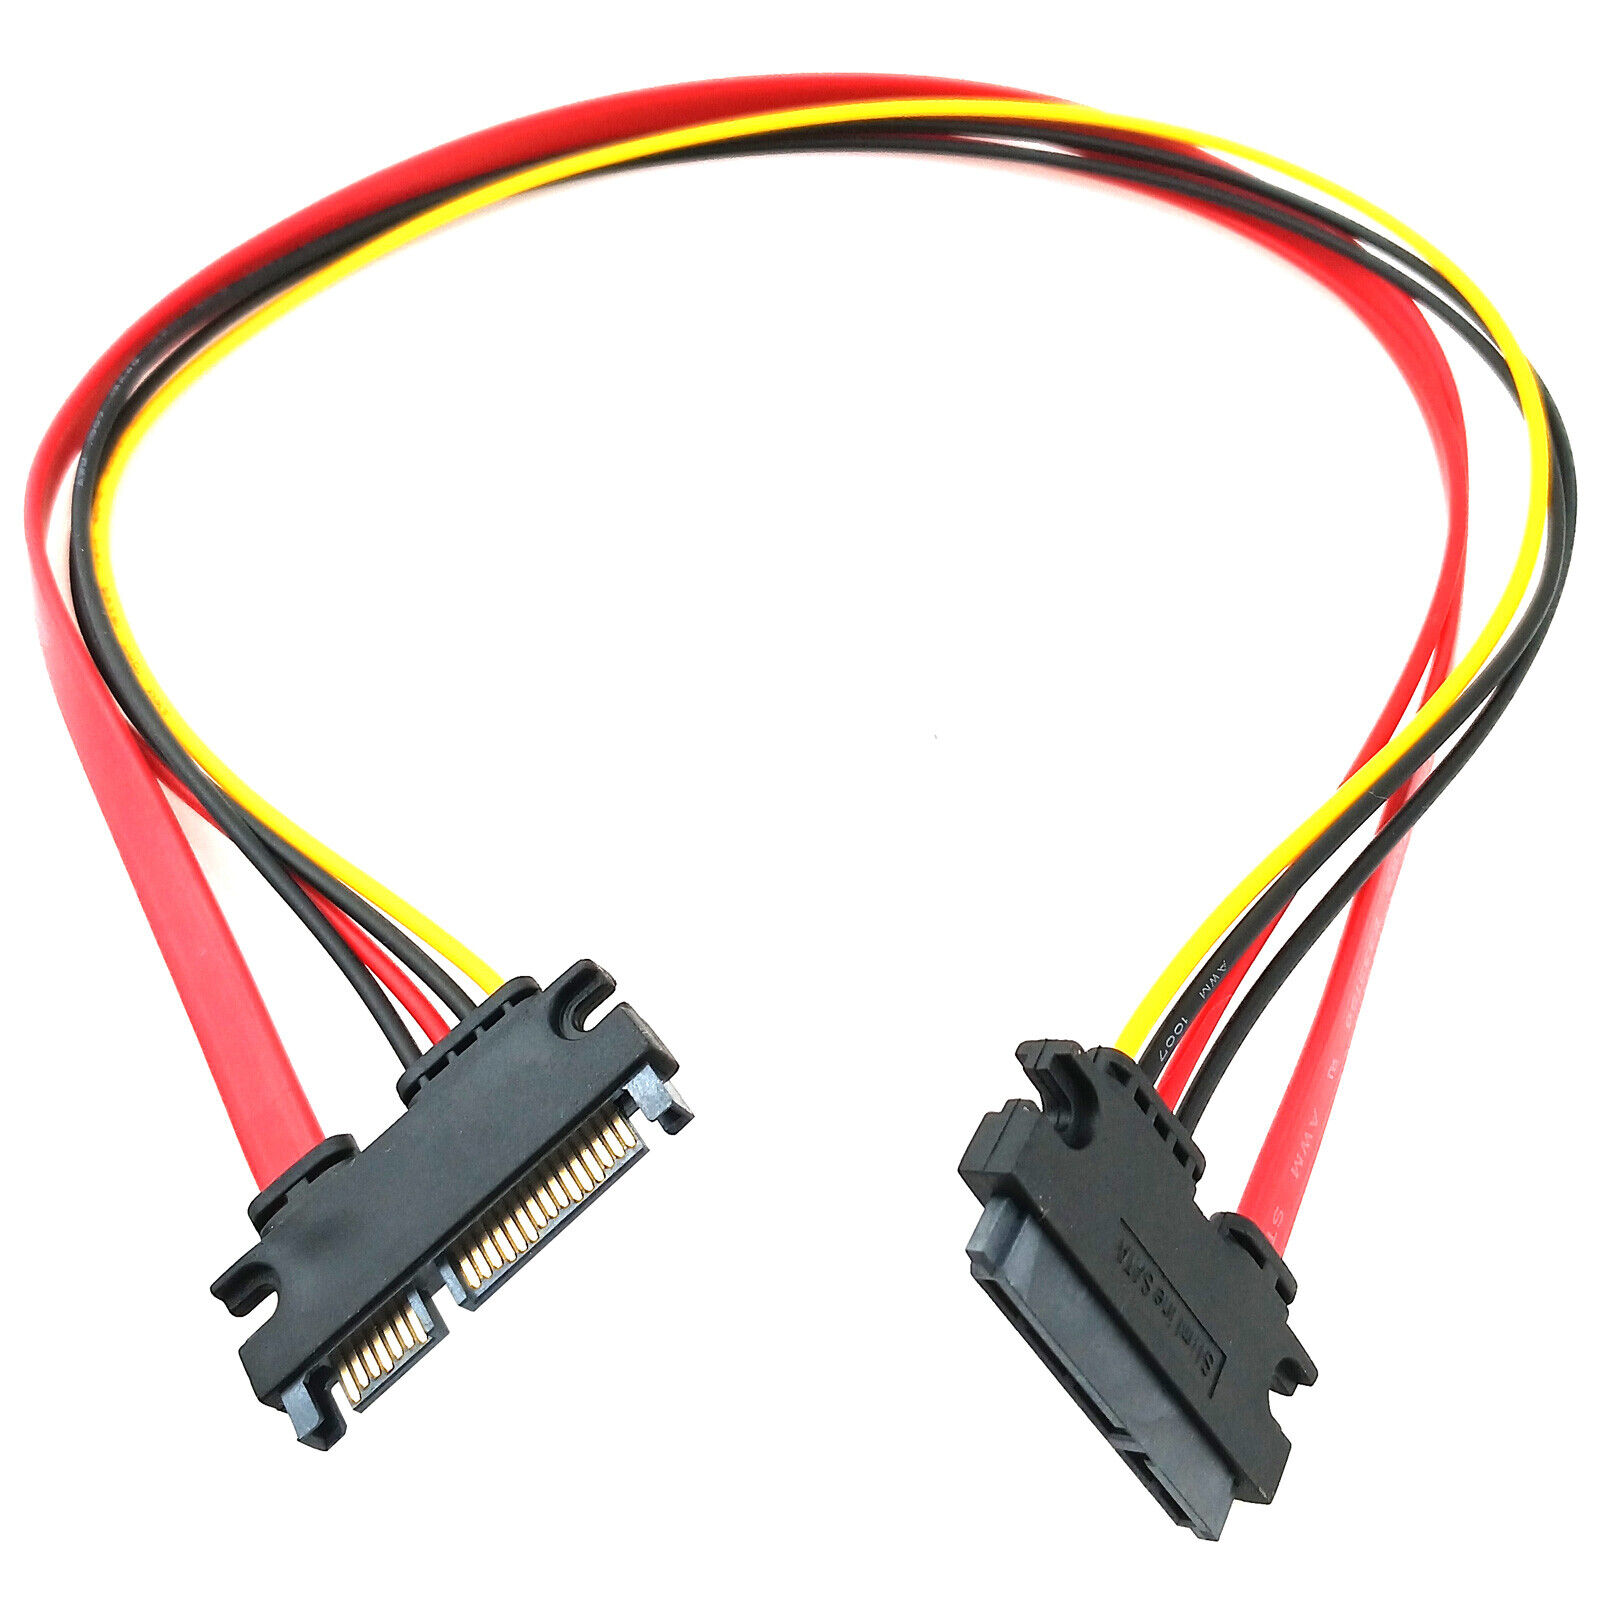 What is SATA Power Cable？